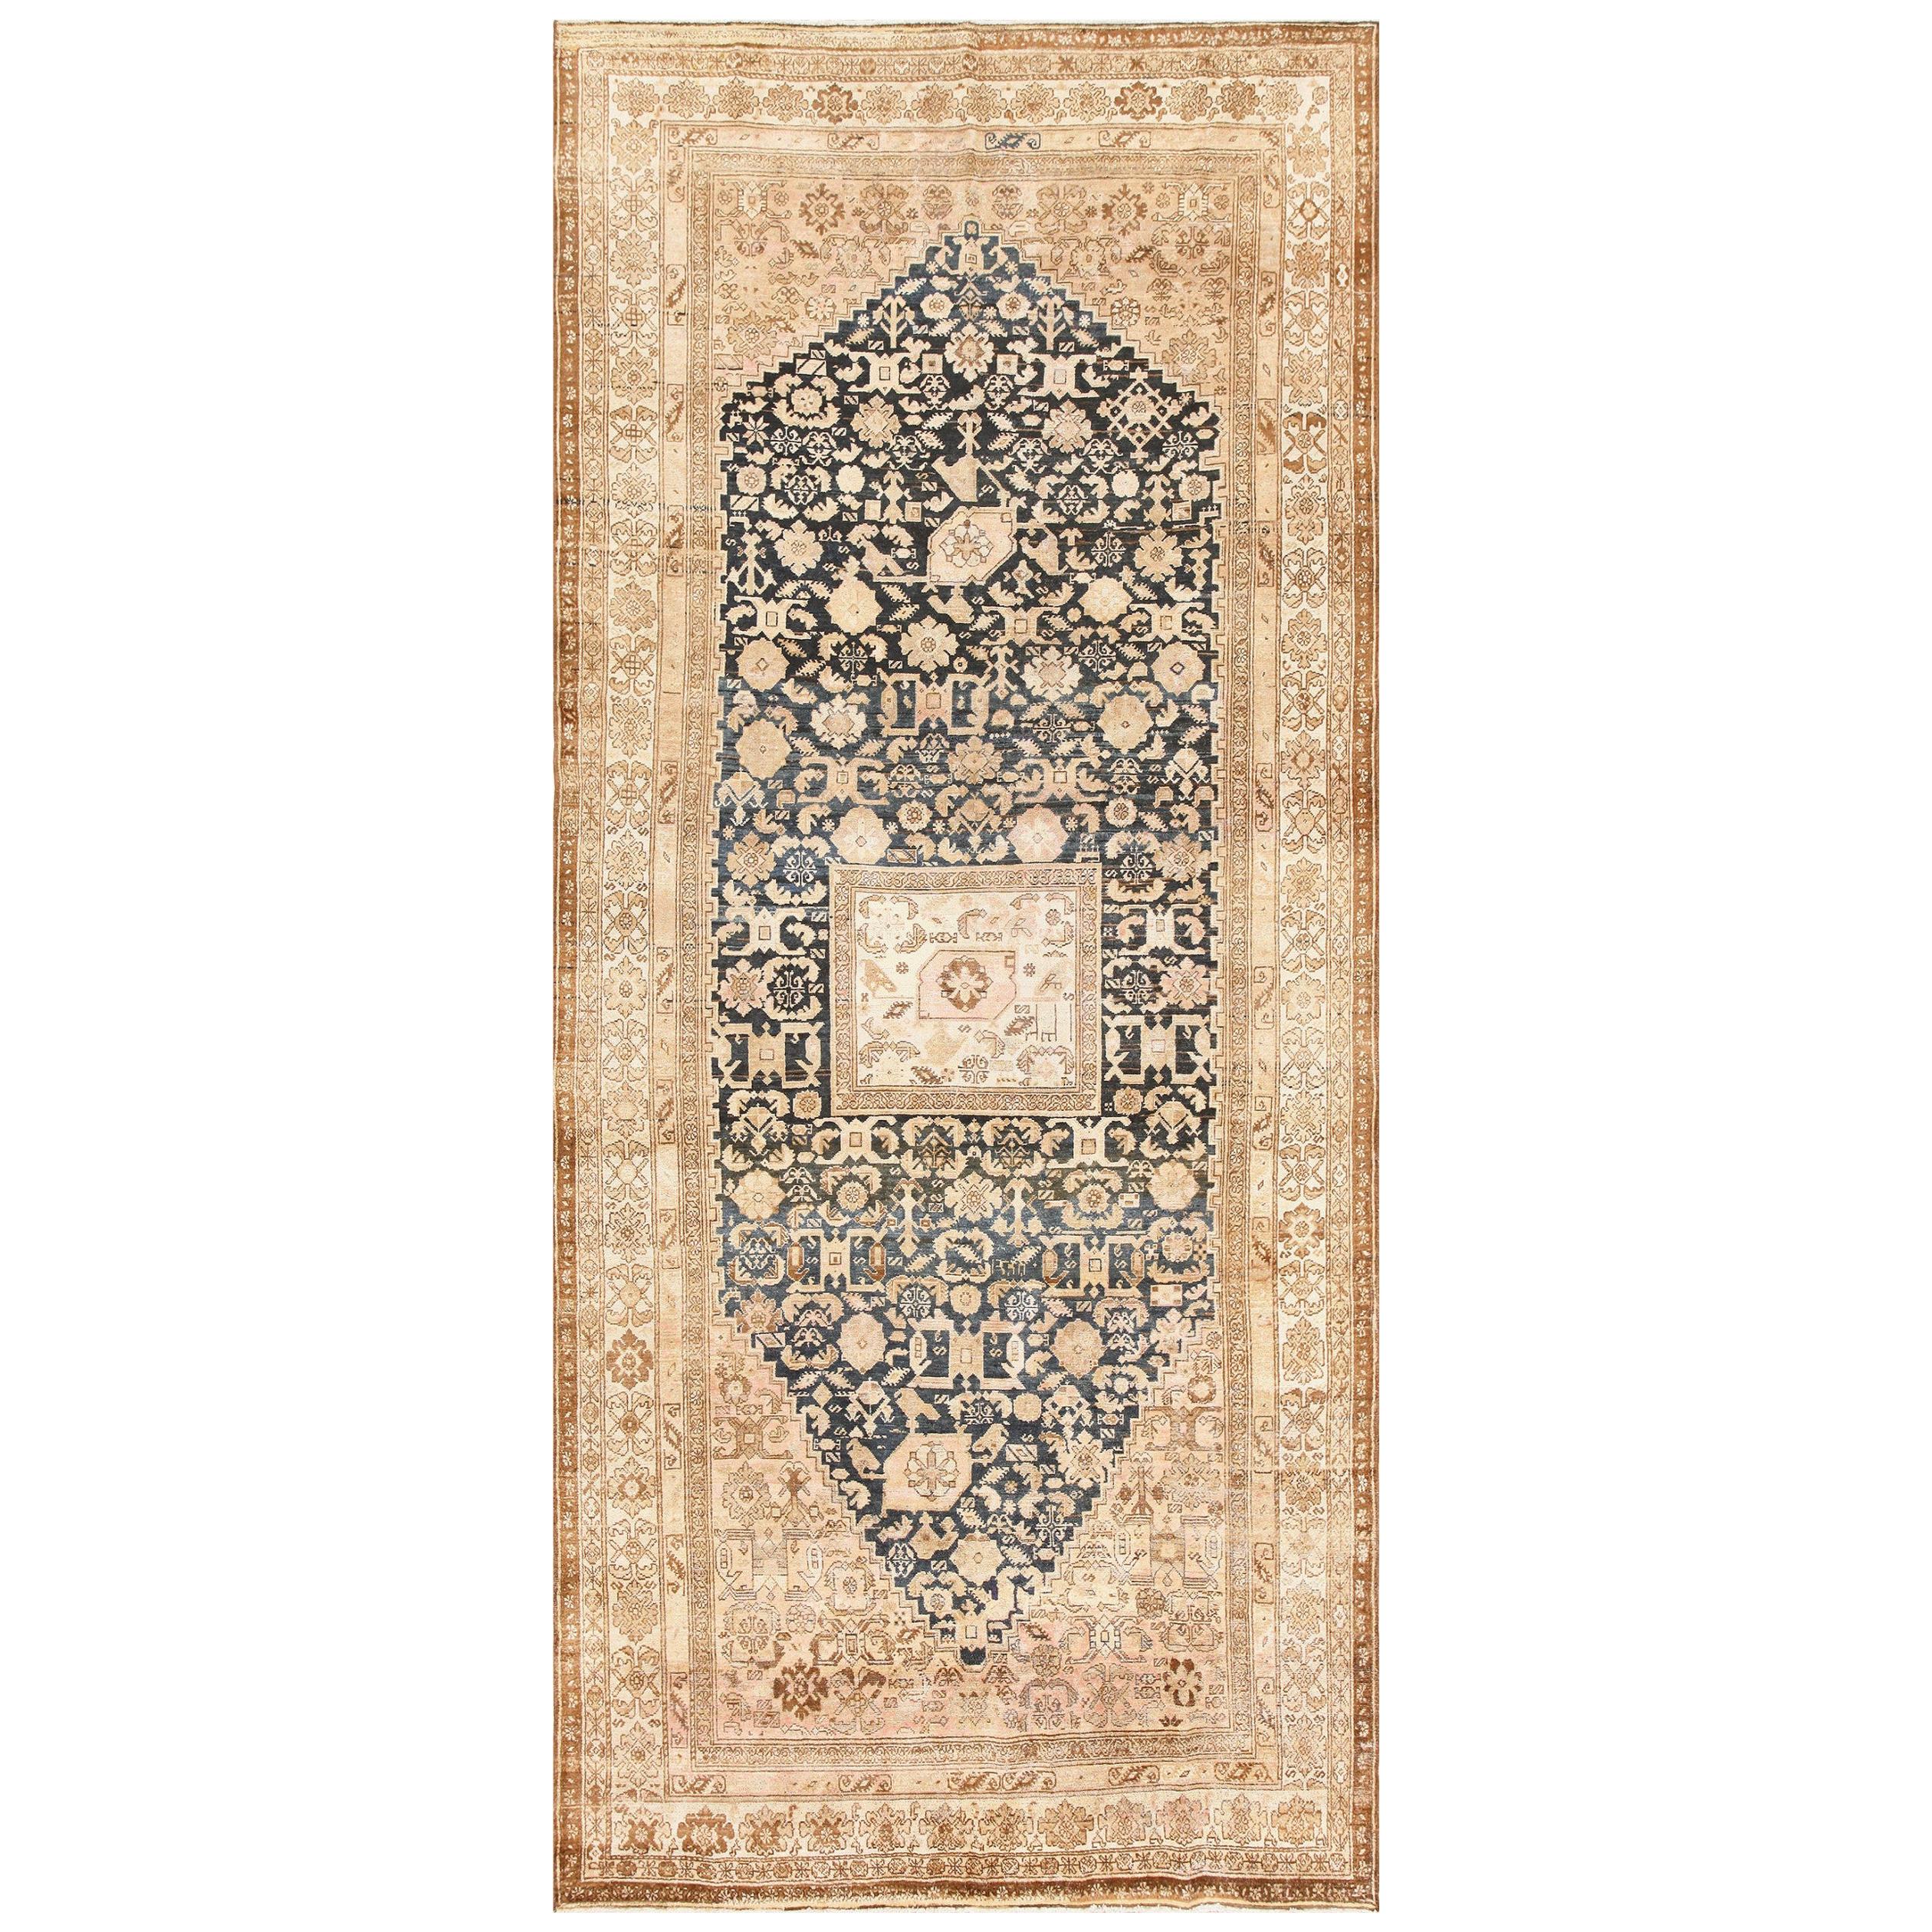 Nazmiyal Collection Antique Tribal Persian Malayer Rug. Size: 7 ft x 15 ft 7 in